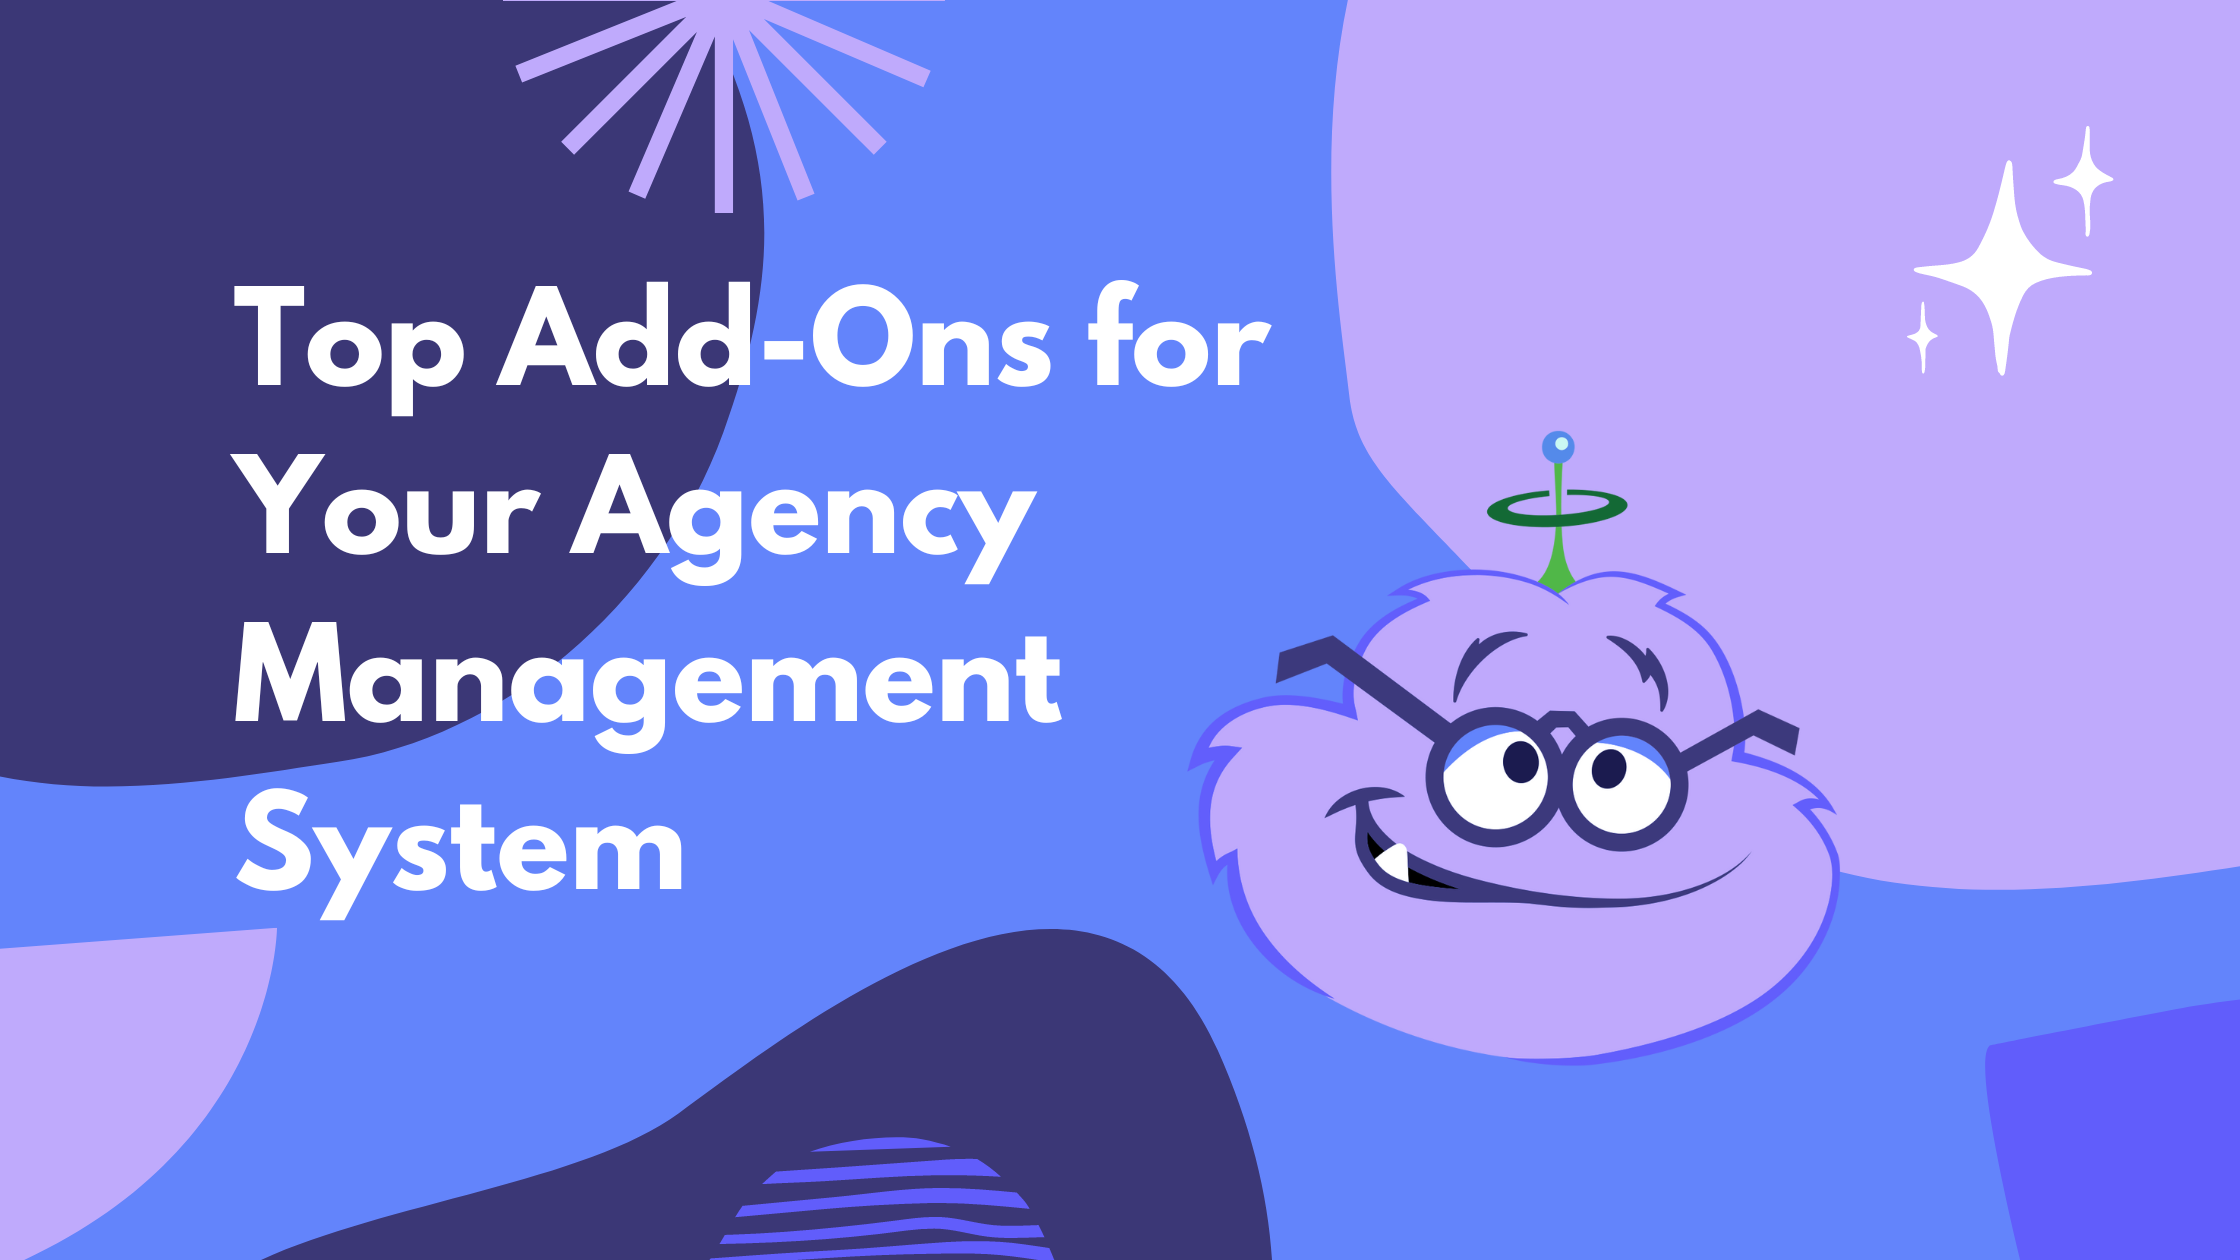 Top Add-Ons for Your Agency Management System